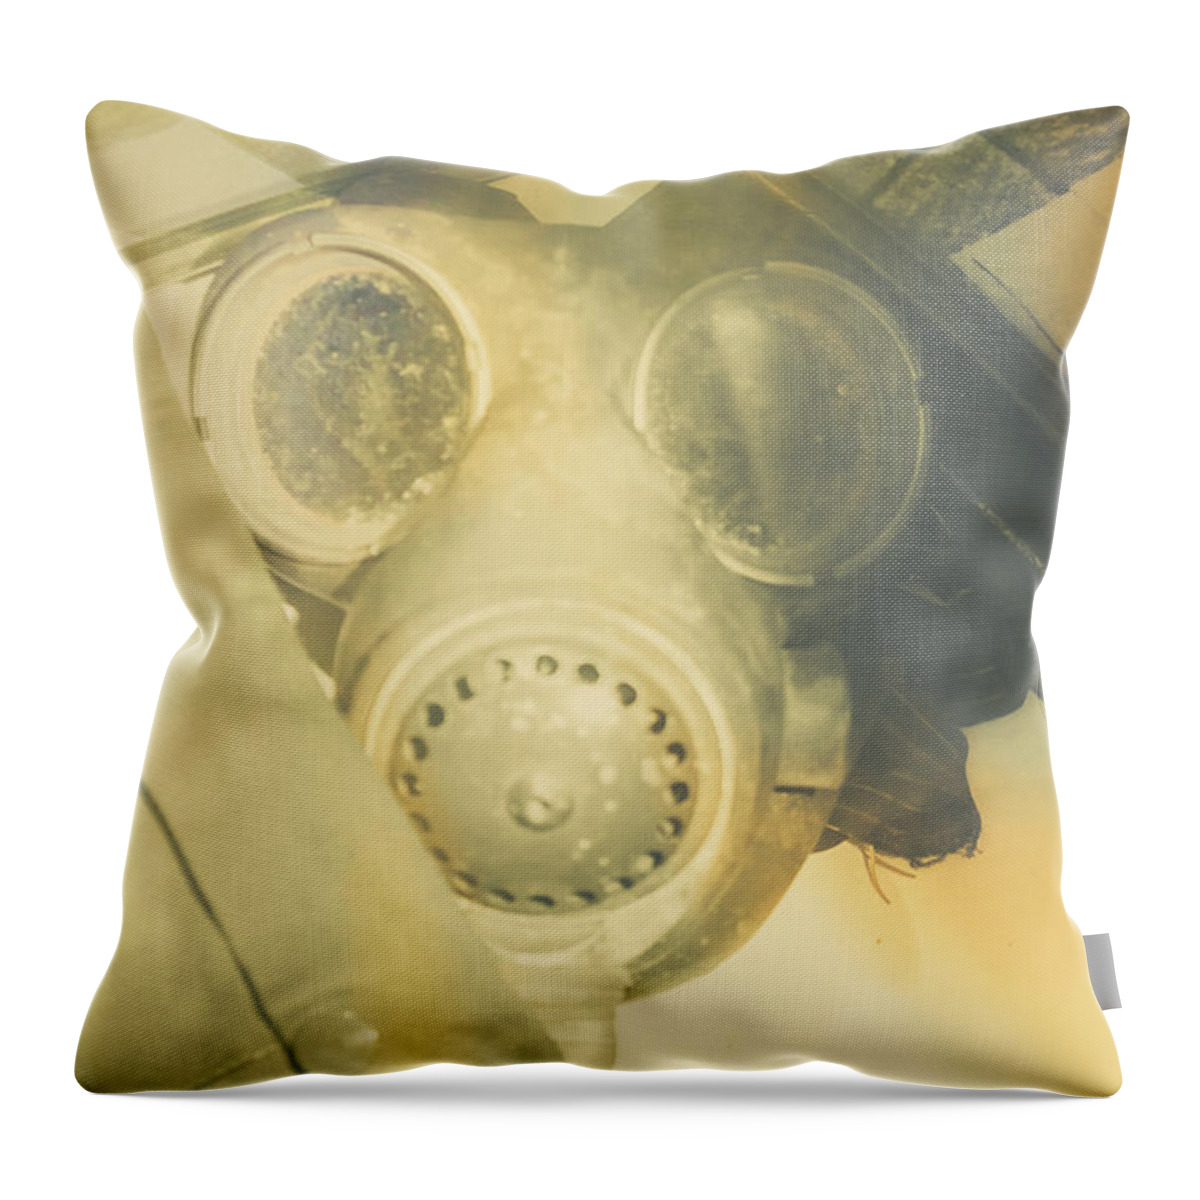 Vintage Throw Pillow featuring the photograph In case of war by Jorgo Photography